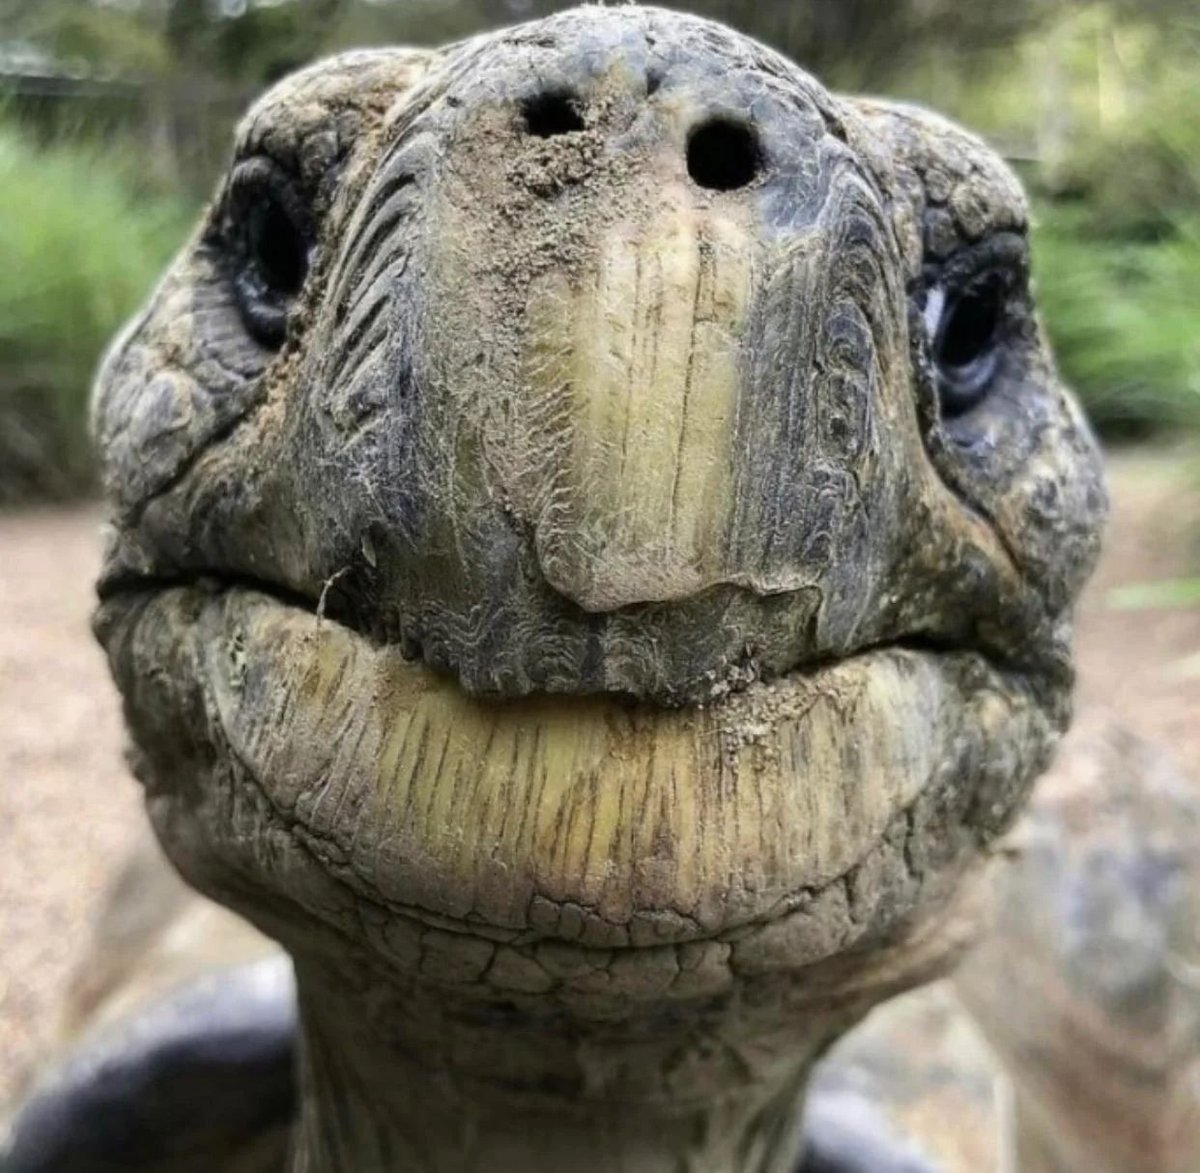 The face of a 191 years old tortoise, the longest known living land #animal. Who does it remind you of? 😊

#life #lifeisbeautiful #NatureLover #AnimalLovers #photographyIsArt #naturephotographyday #beautifulnature #KNOWLEDGE #NFTs #SciencesPo #NFT #digitalart #SundayFunday #Fuel